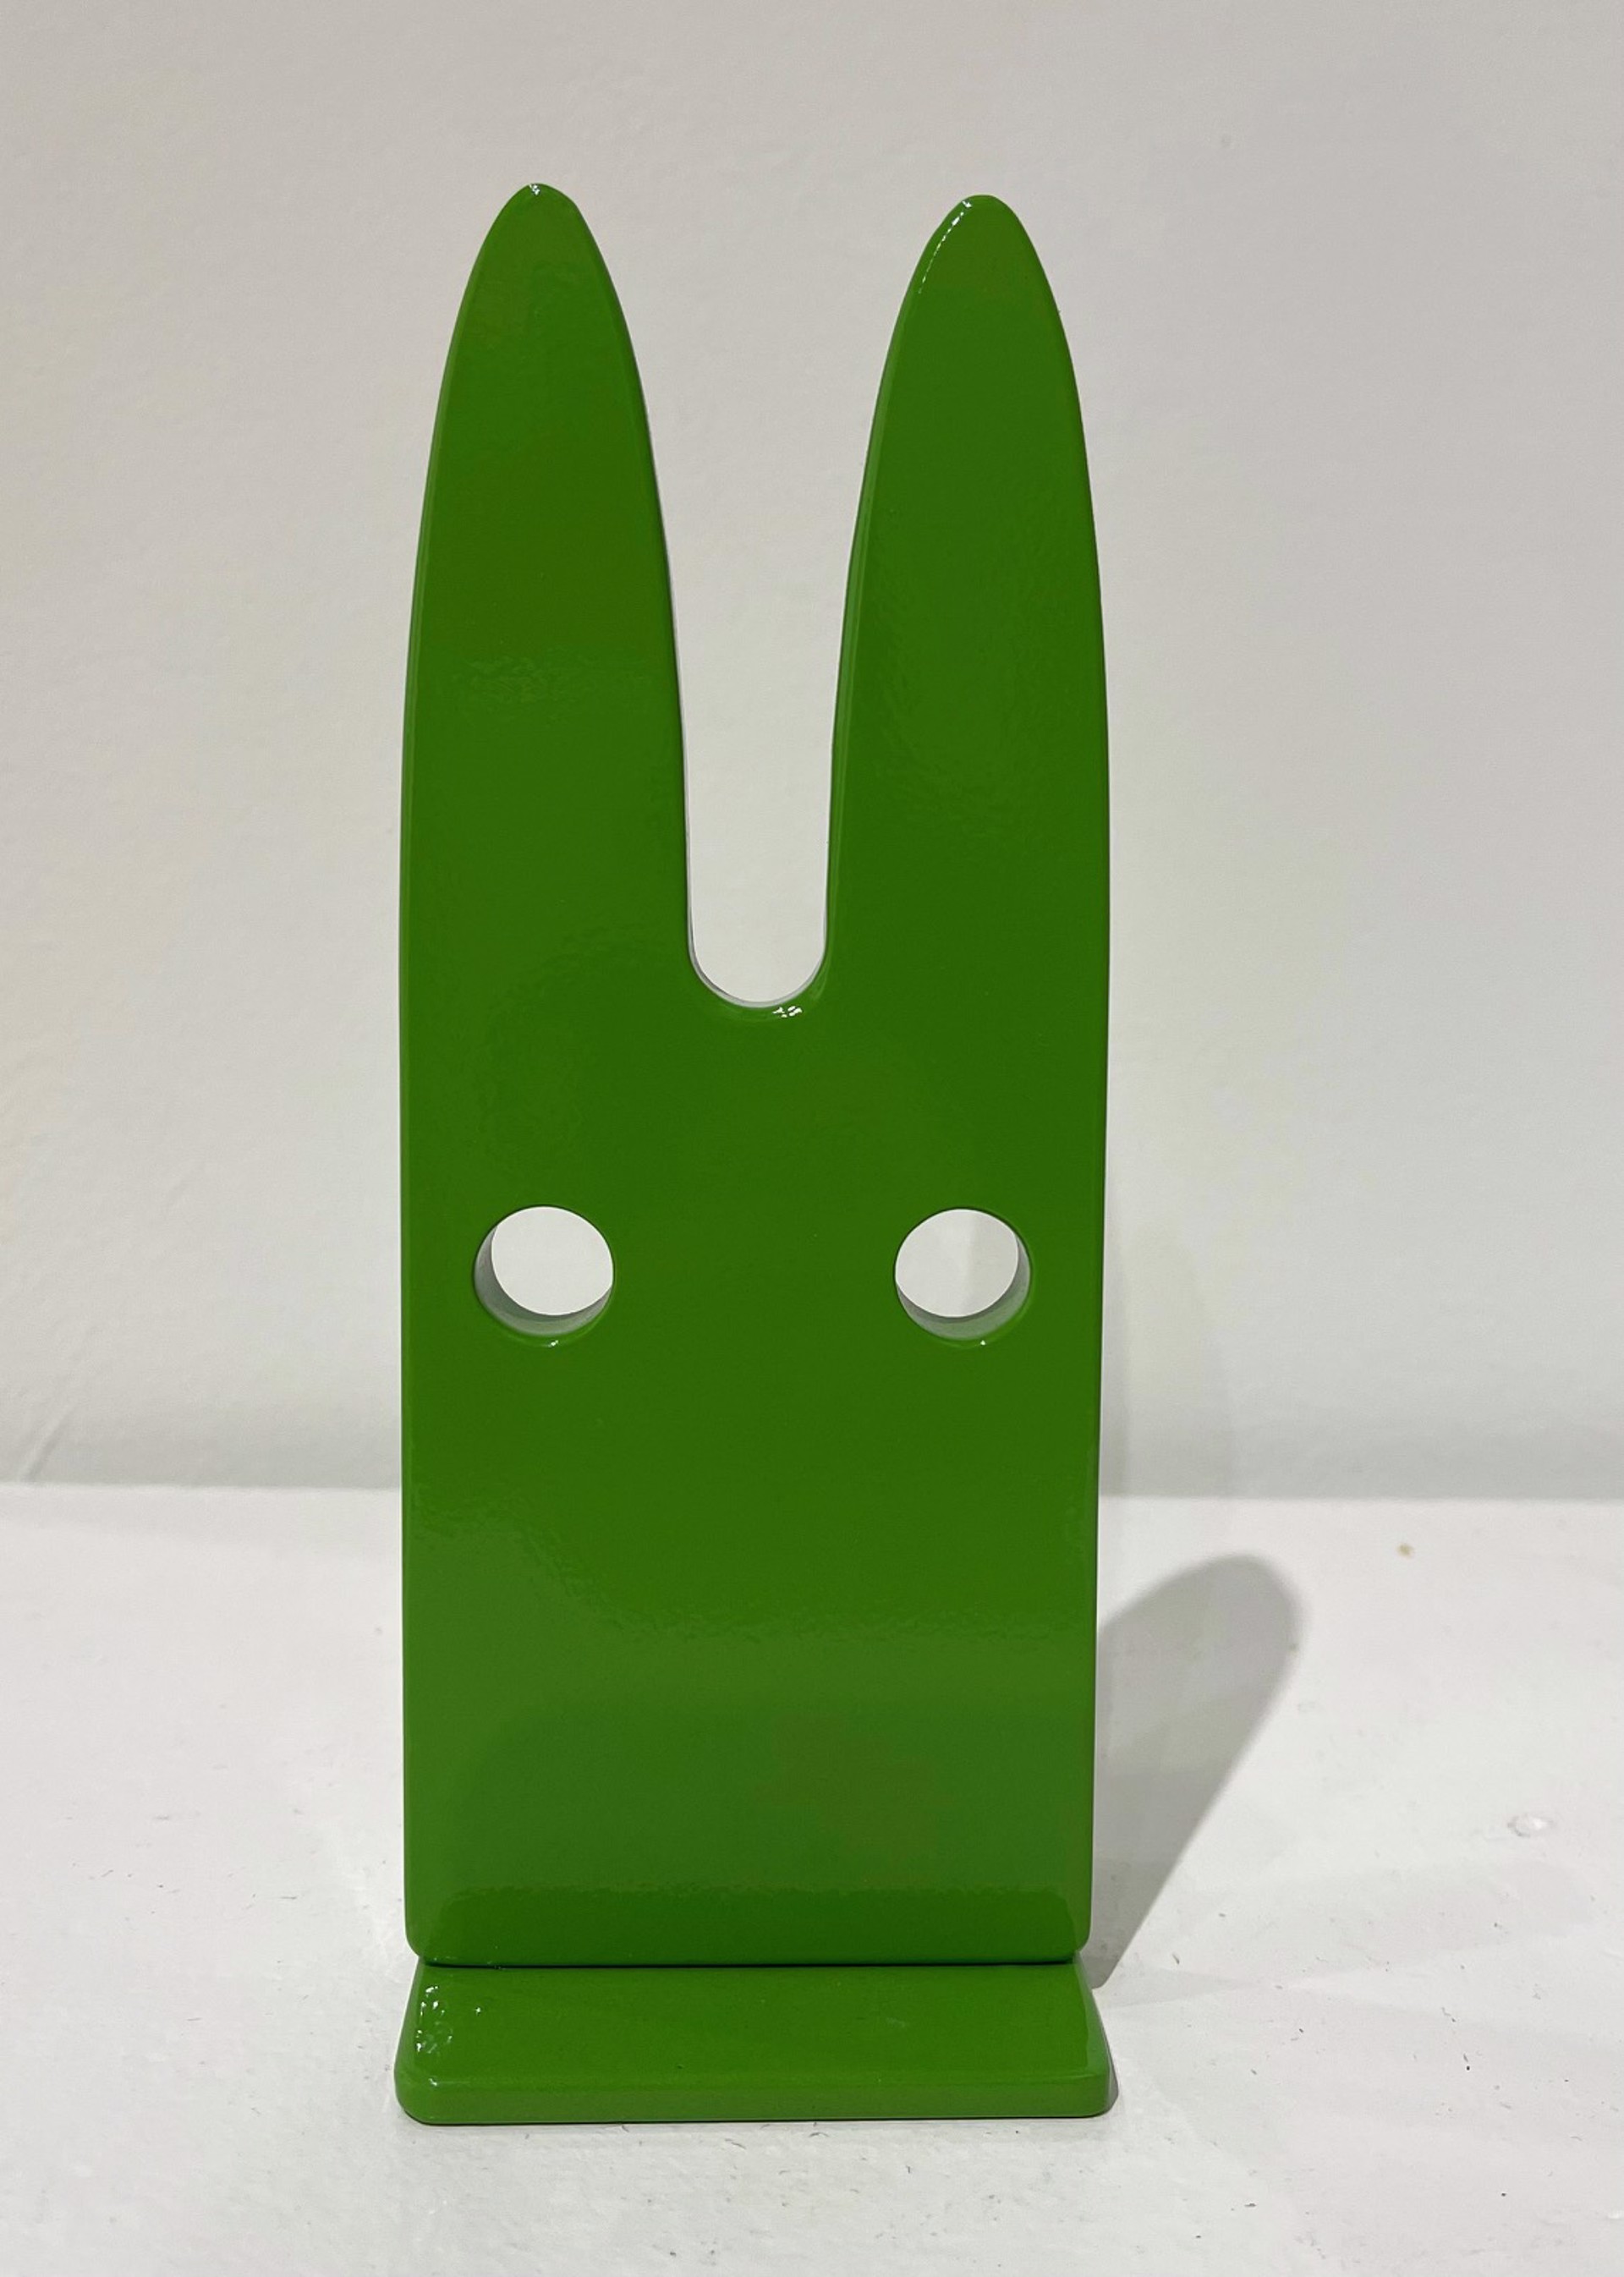 Bunny Green by Jeffie Brewer